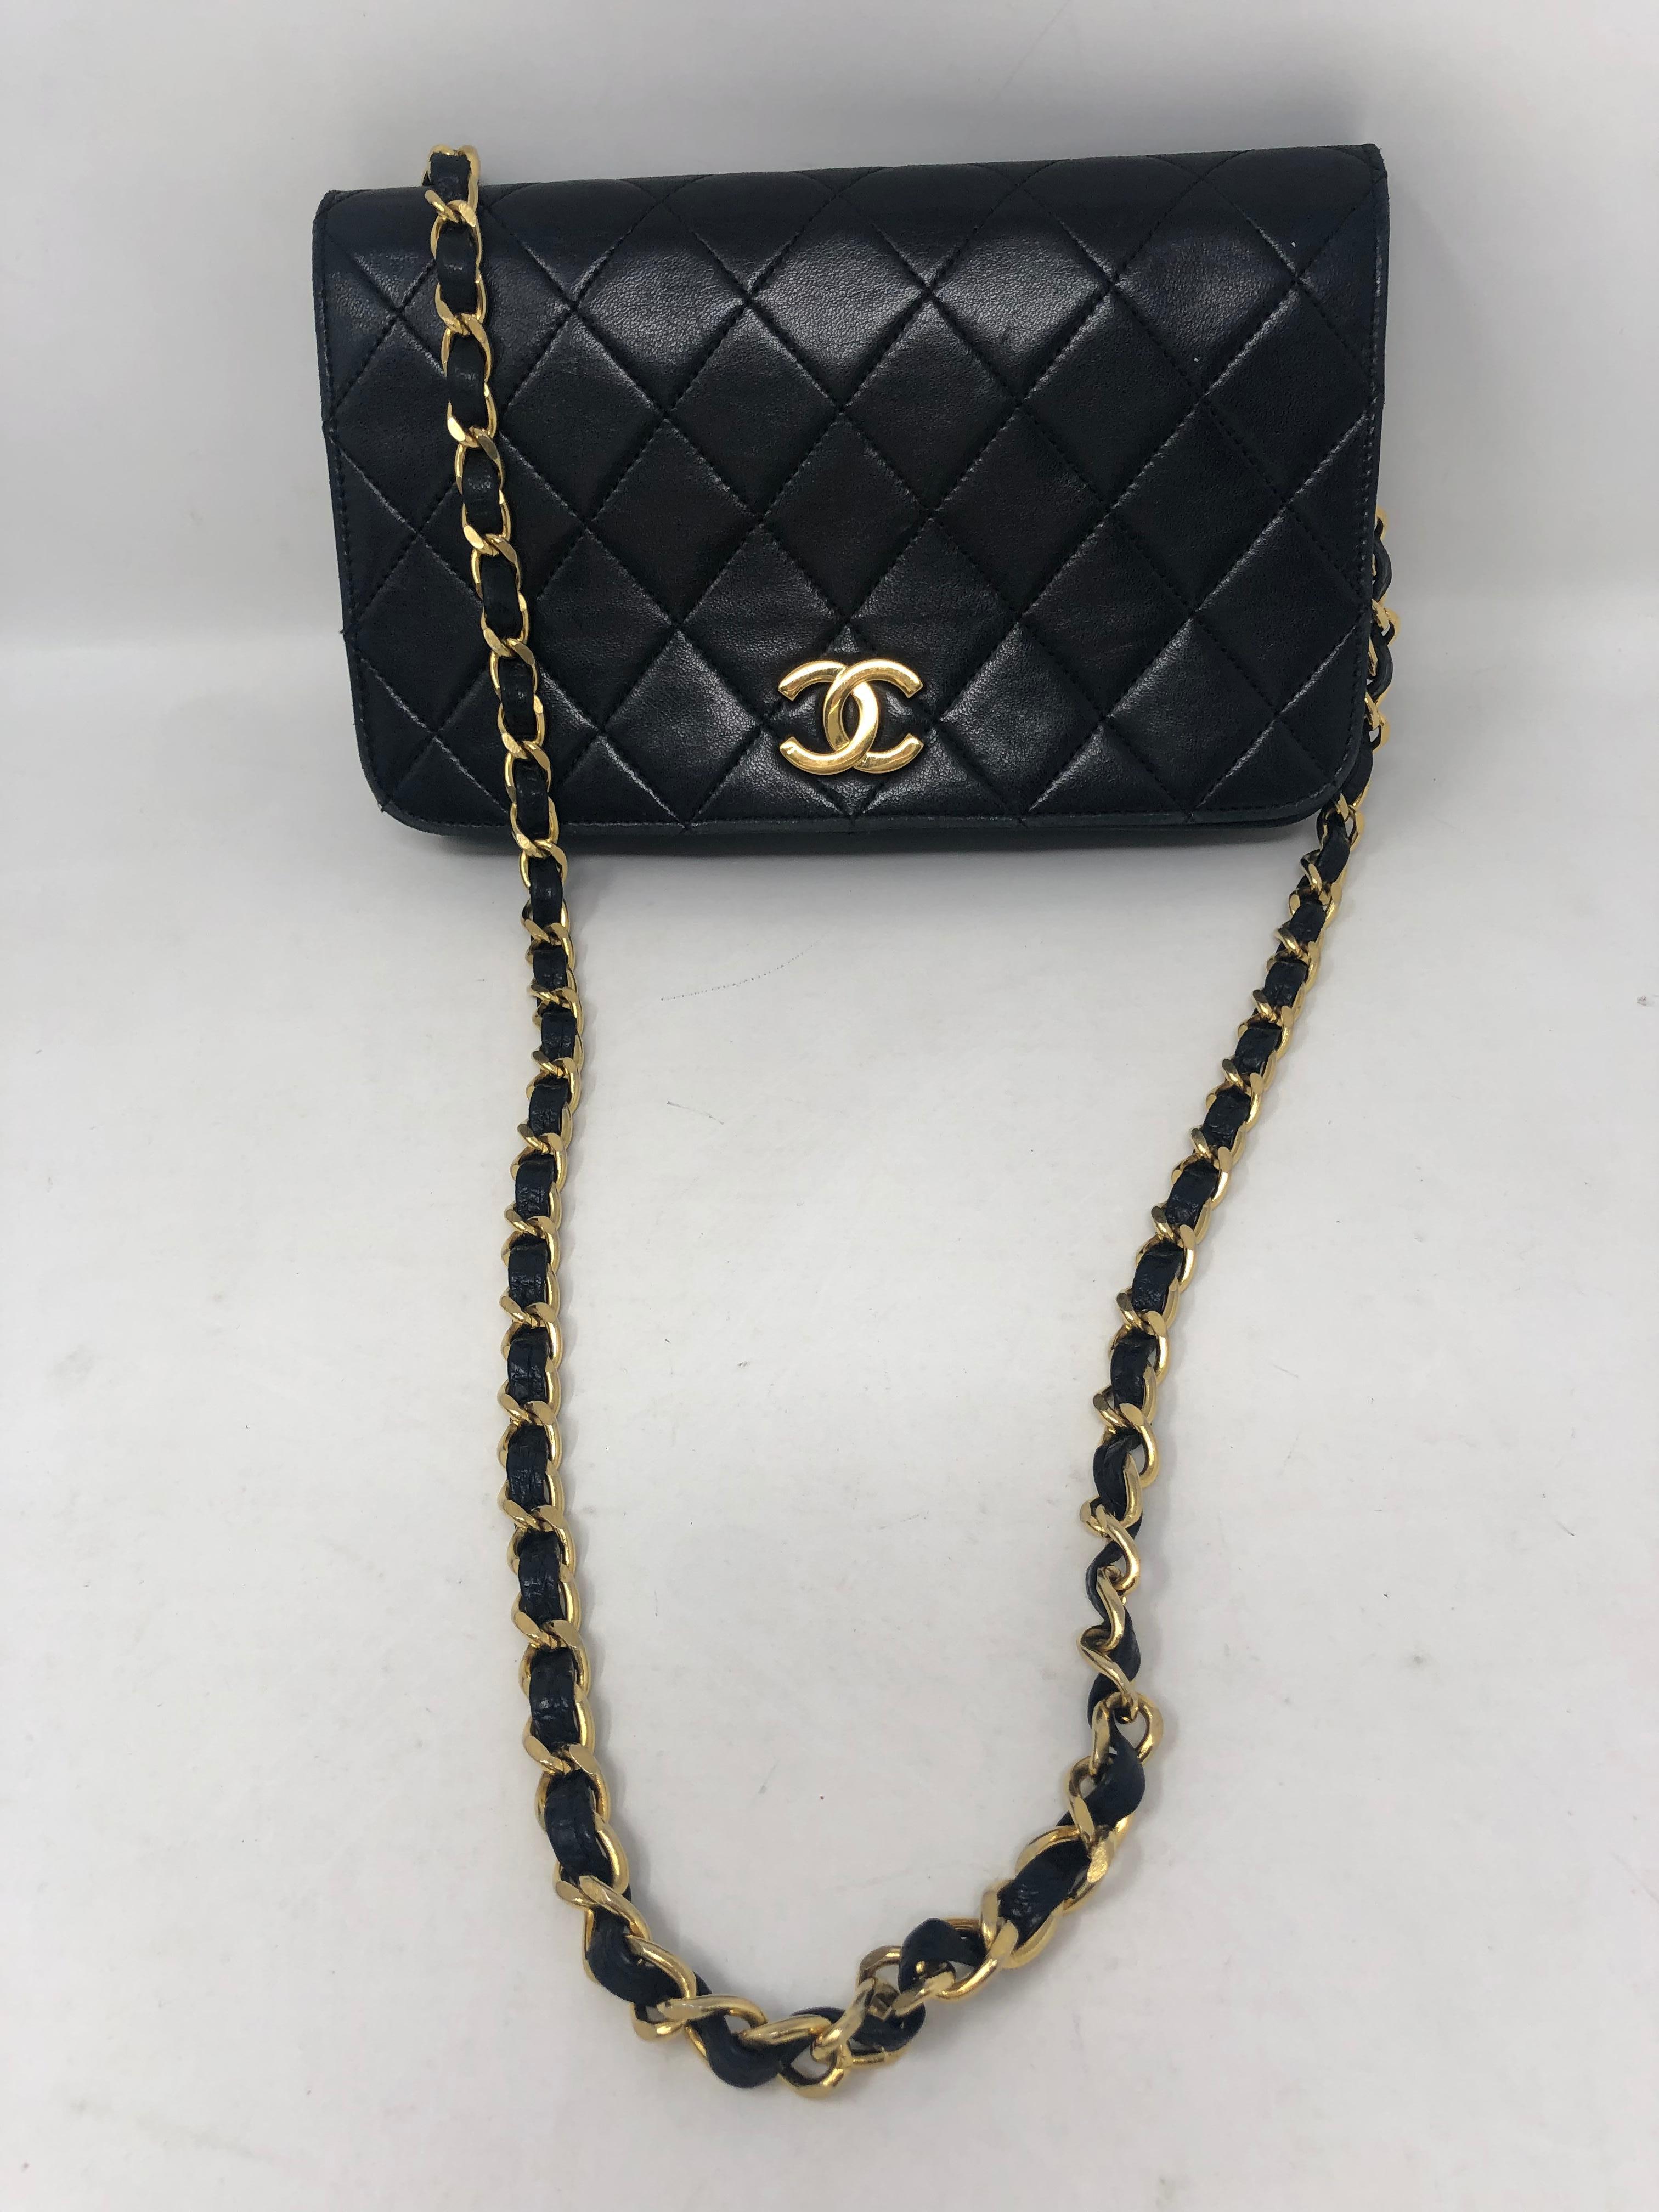 Chanel Black Clutch/ Evening Bag. Chain can be tucked in and worn as a clutch. Also can be worn as a shoulder bag. Beautiful black lambskin leather. Vintage piece. Good condition. Classic style. Guaranteed authentic. 